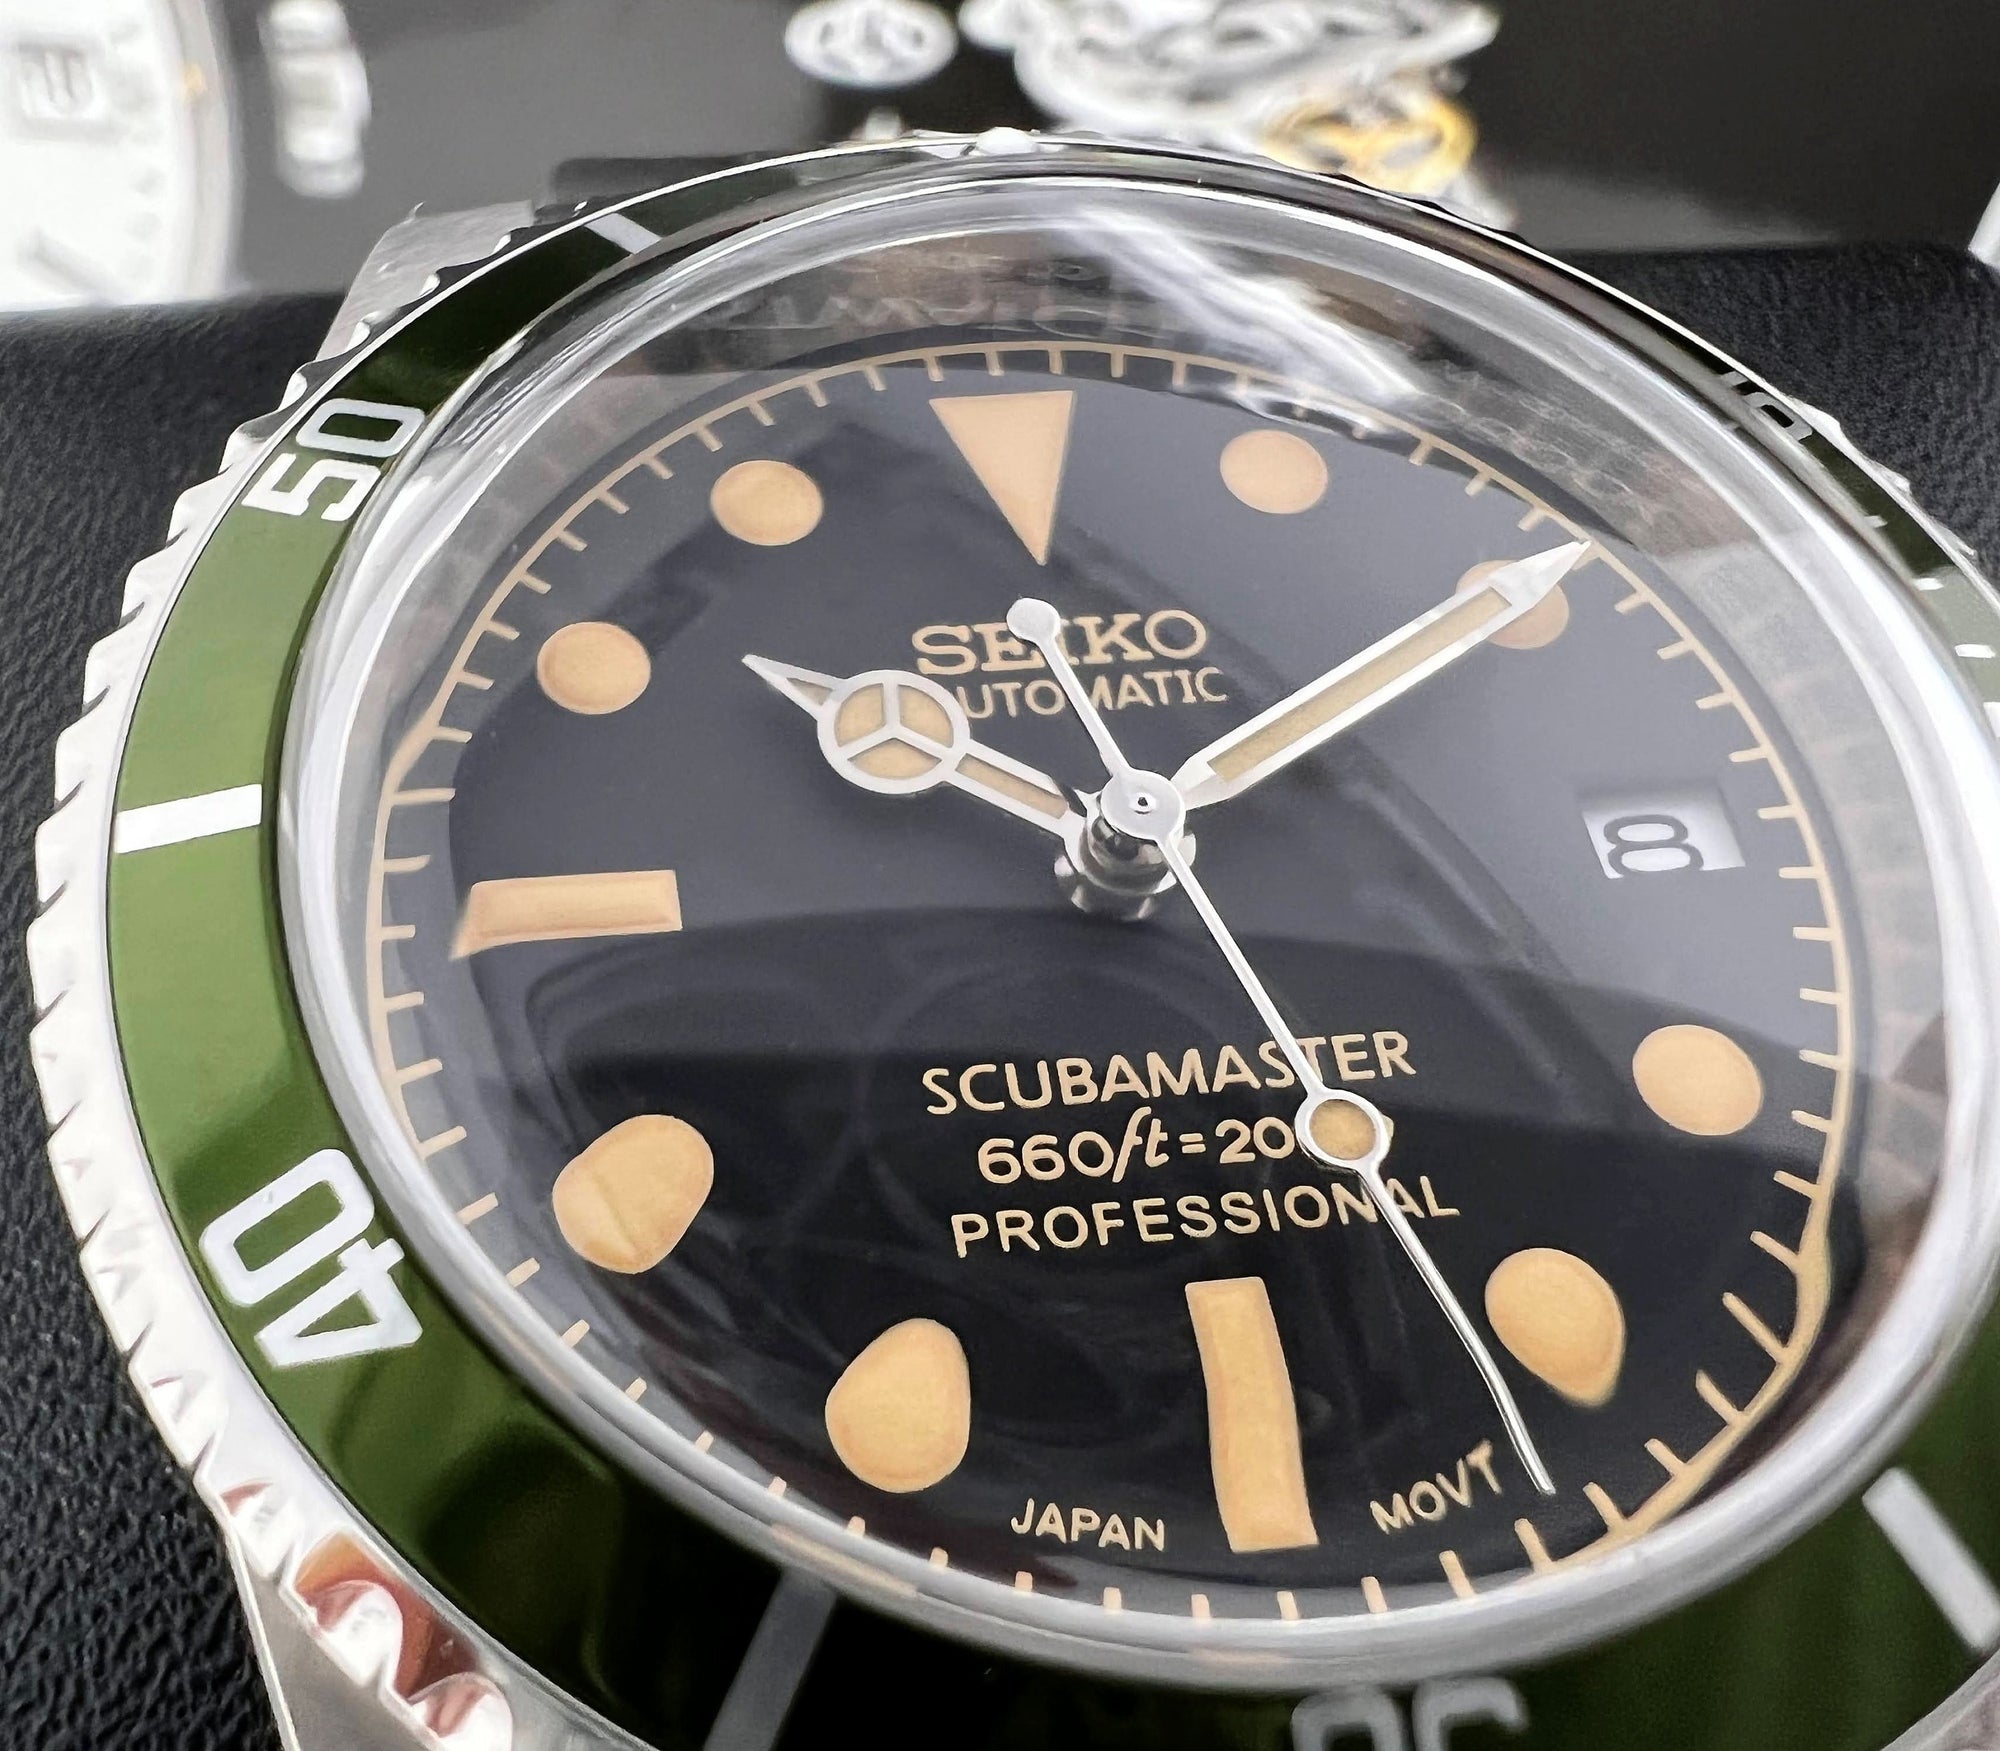 Seiko Lime Green Scuba Master -  Vintage Submariner Style Diver - Beautiful Domed Crystal - Green, Military Milsub - Ready to Ship!